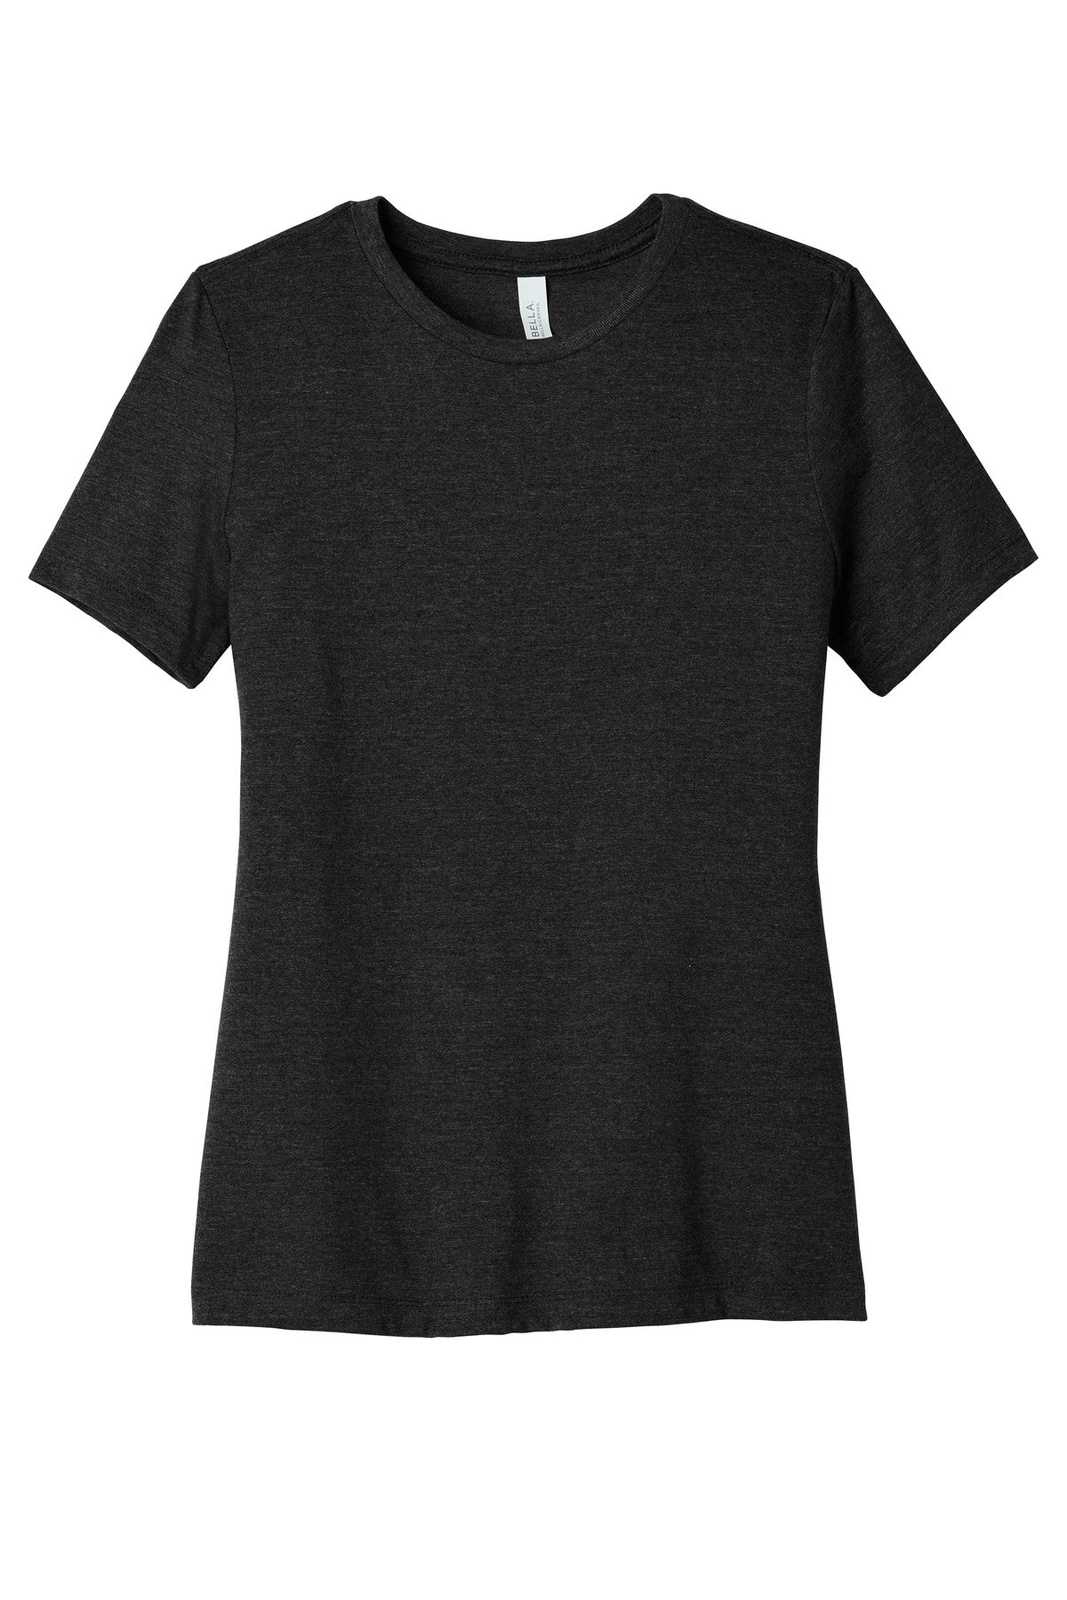 Bella + Canvas 6400 Women's Relaxed Jersey Short Sleeve Tee - Black Heather - HIT a Double